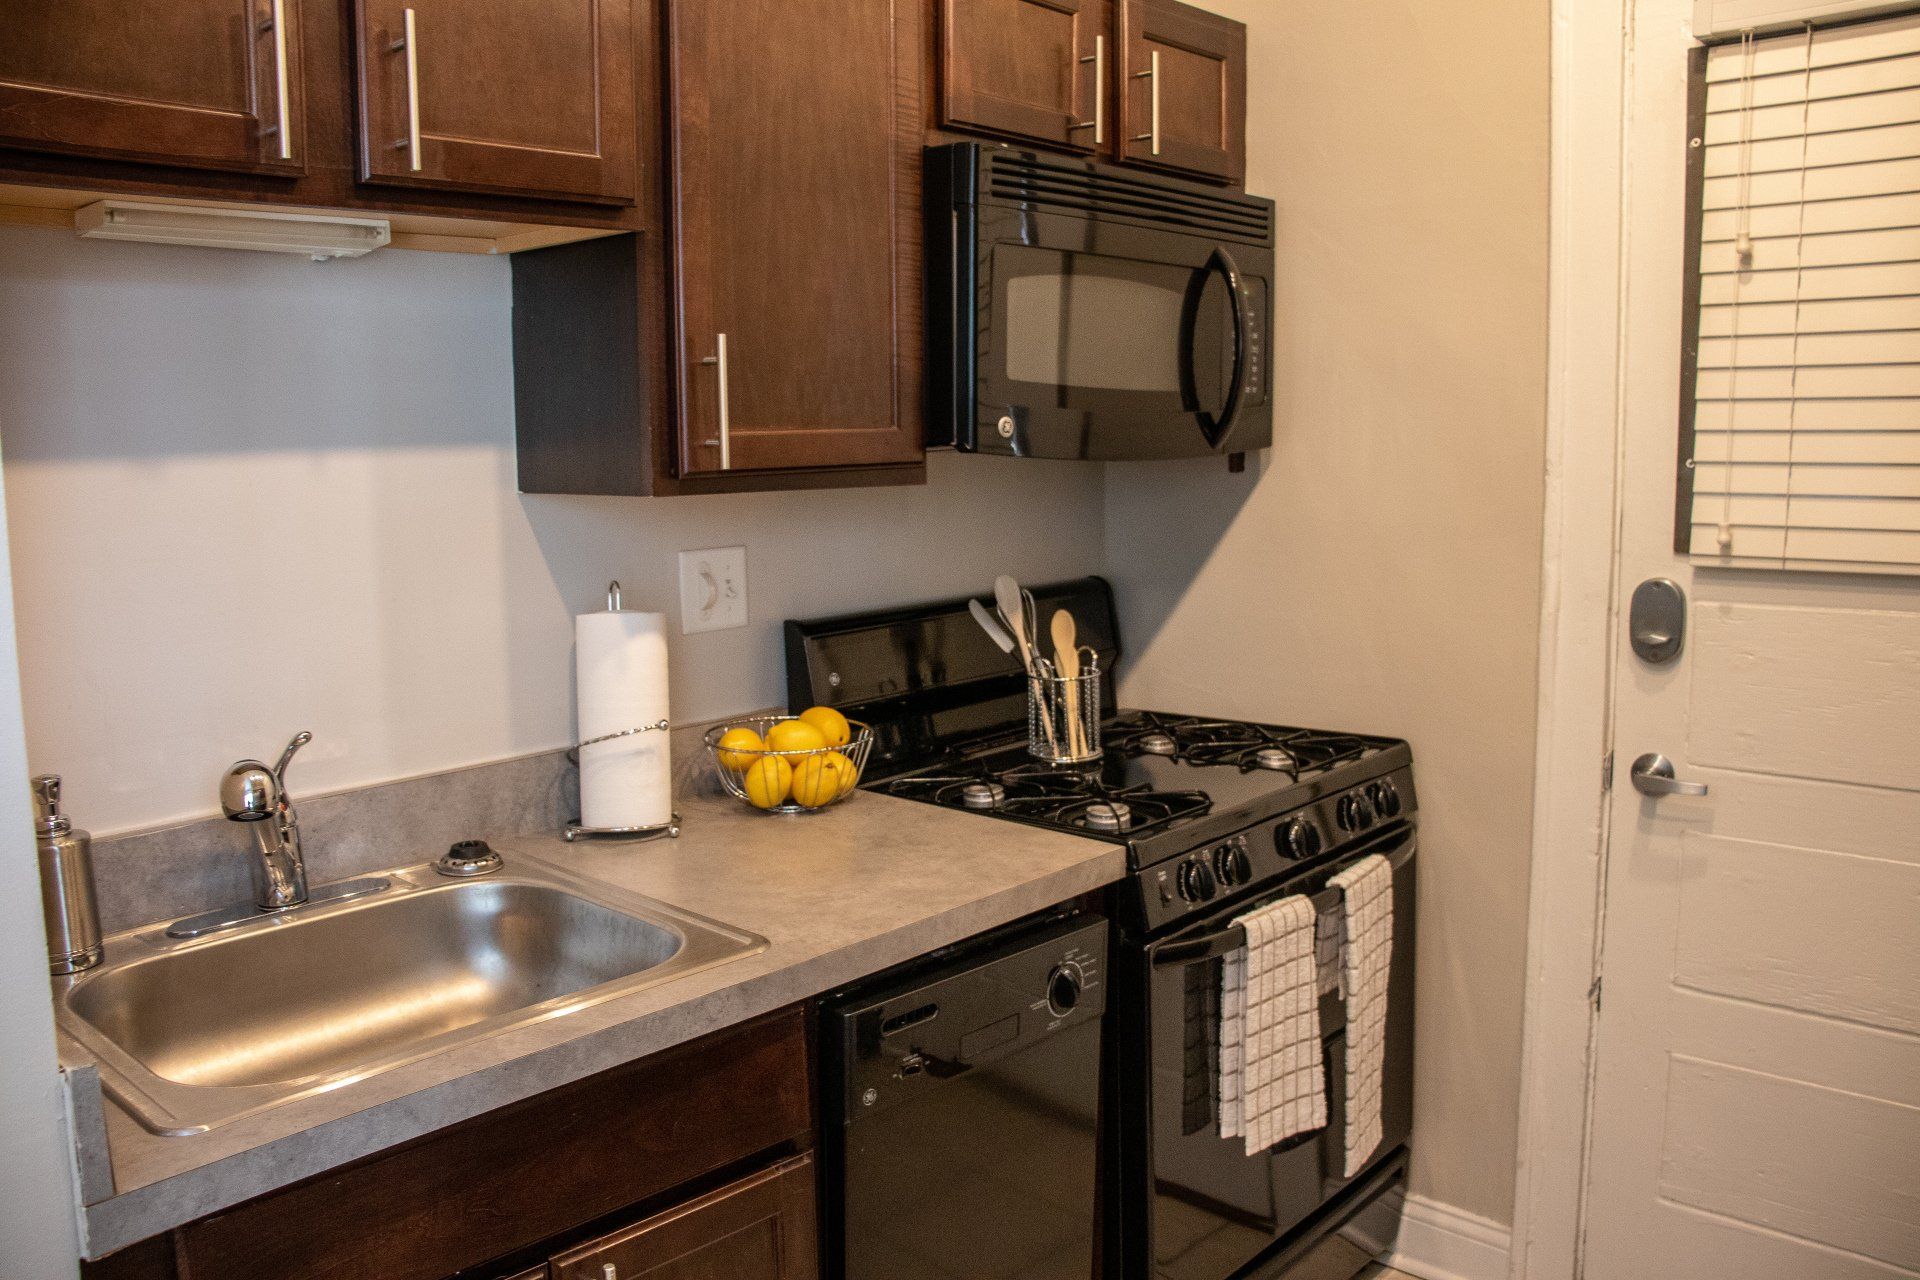 Apartment kitchen with a sink, stove, microwave, and cabinets at Reside at 849.